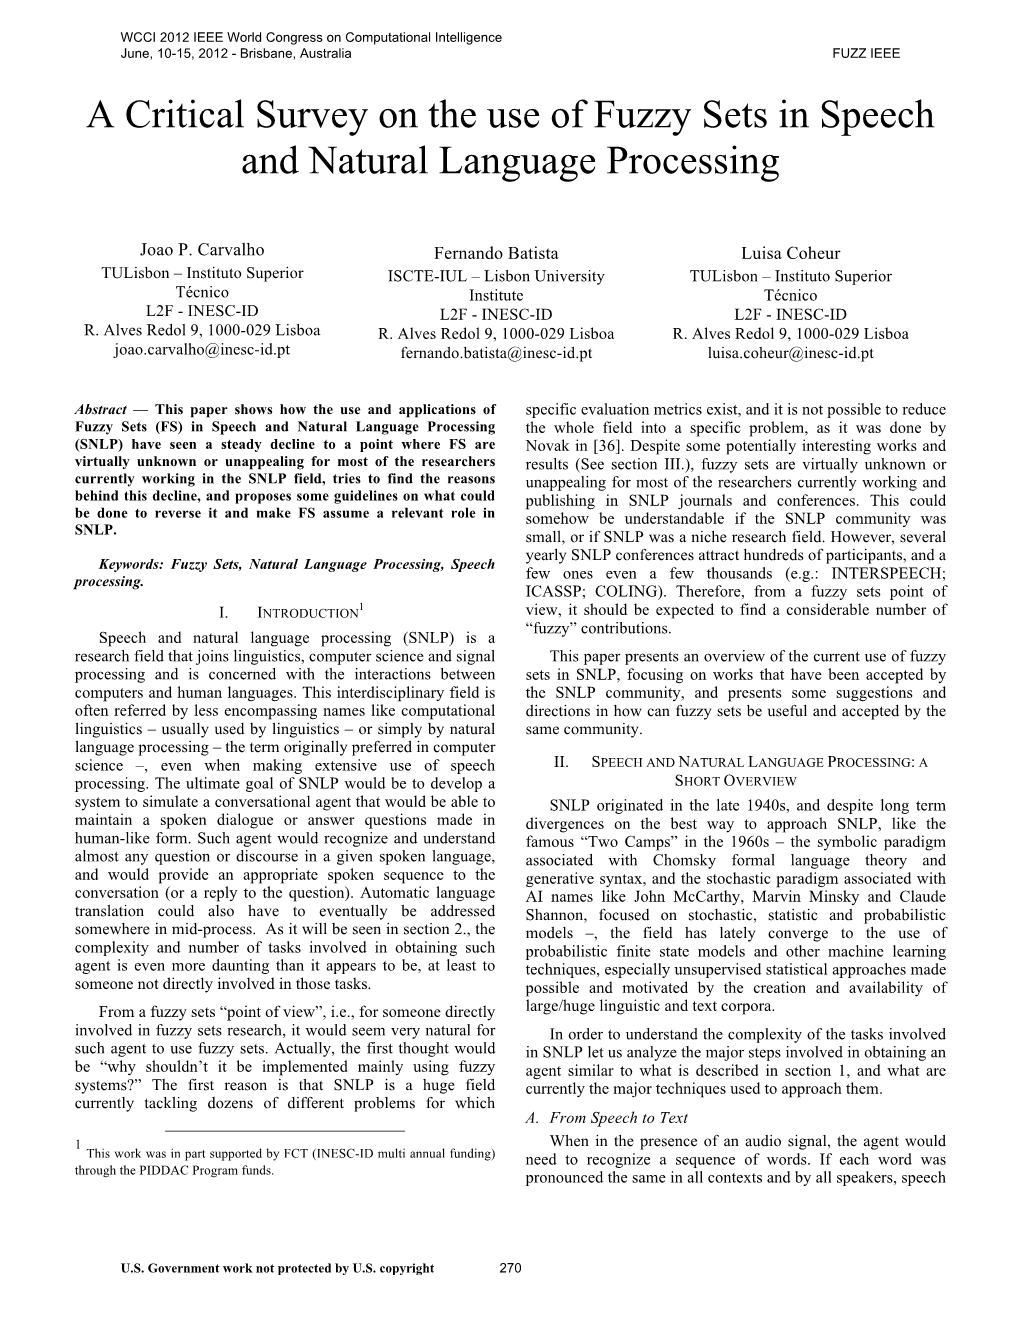 A Critical Survey on the Use of Fuzzy Sets in Speech and Natural Language Processing